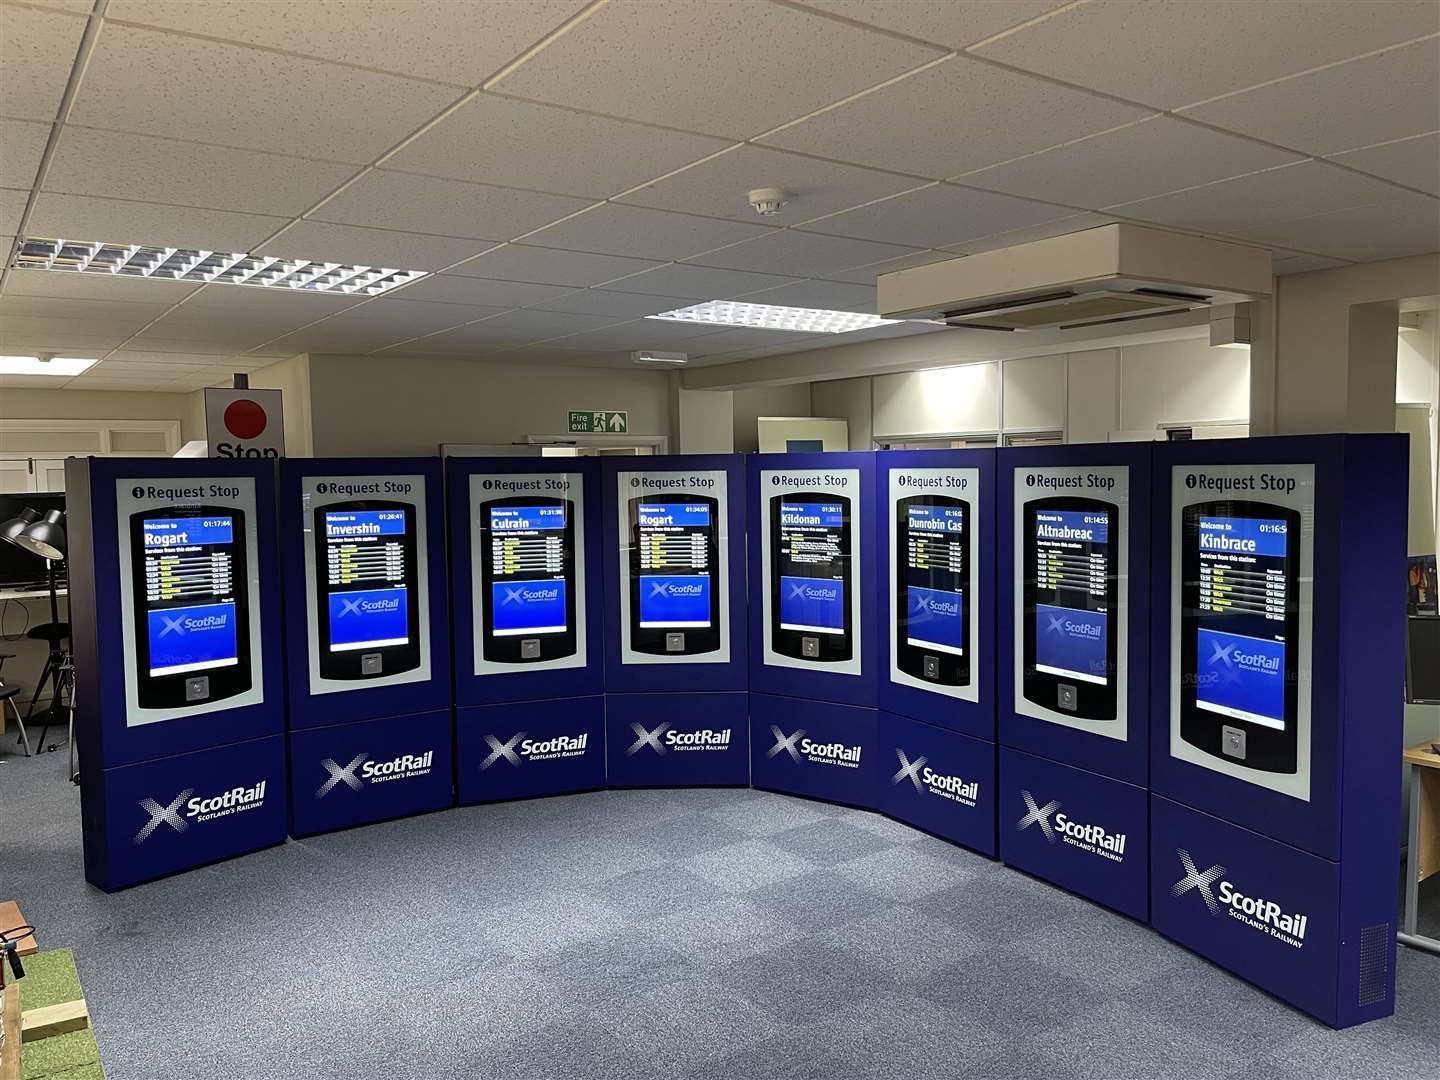 The eight request to stop kiosks which will become operational this summer. They consist of a platform unit with timetable display and request to stop button, signage and an adjacent radio mast.